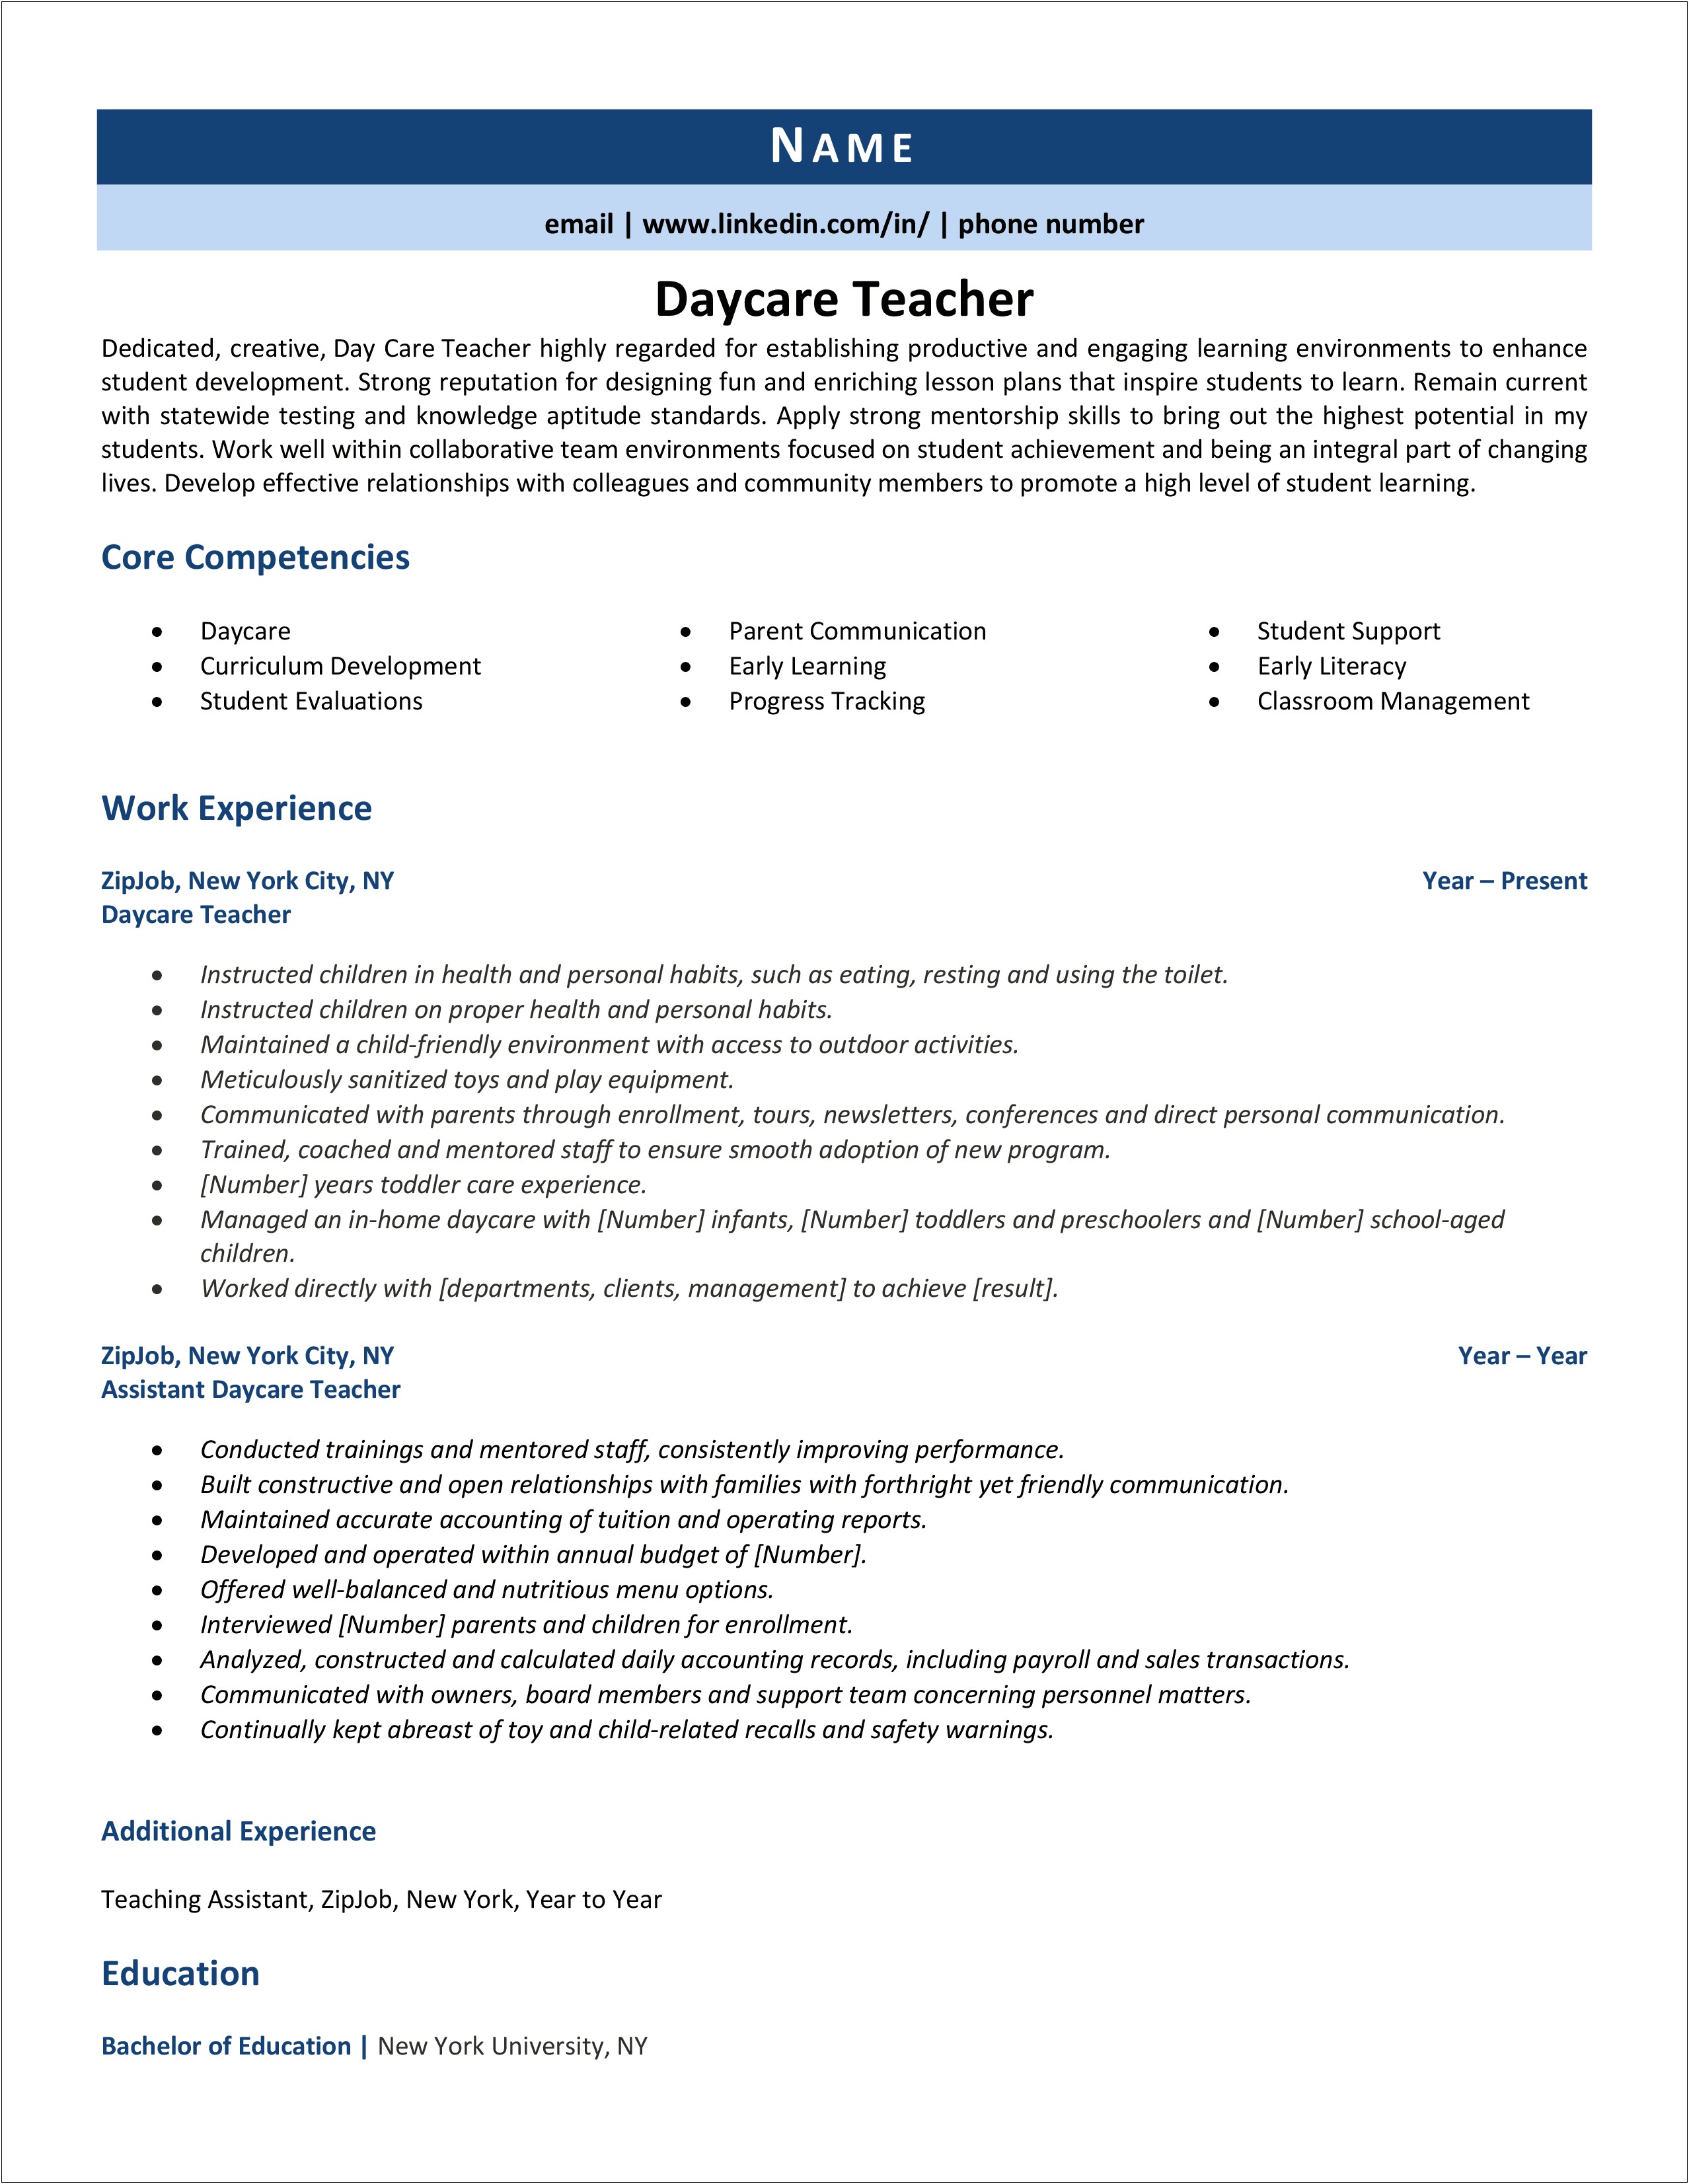 Resume Verbage For Day Daycare Worker